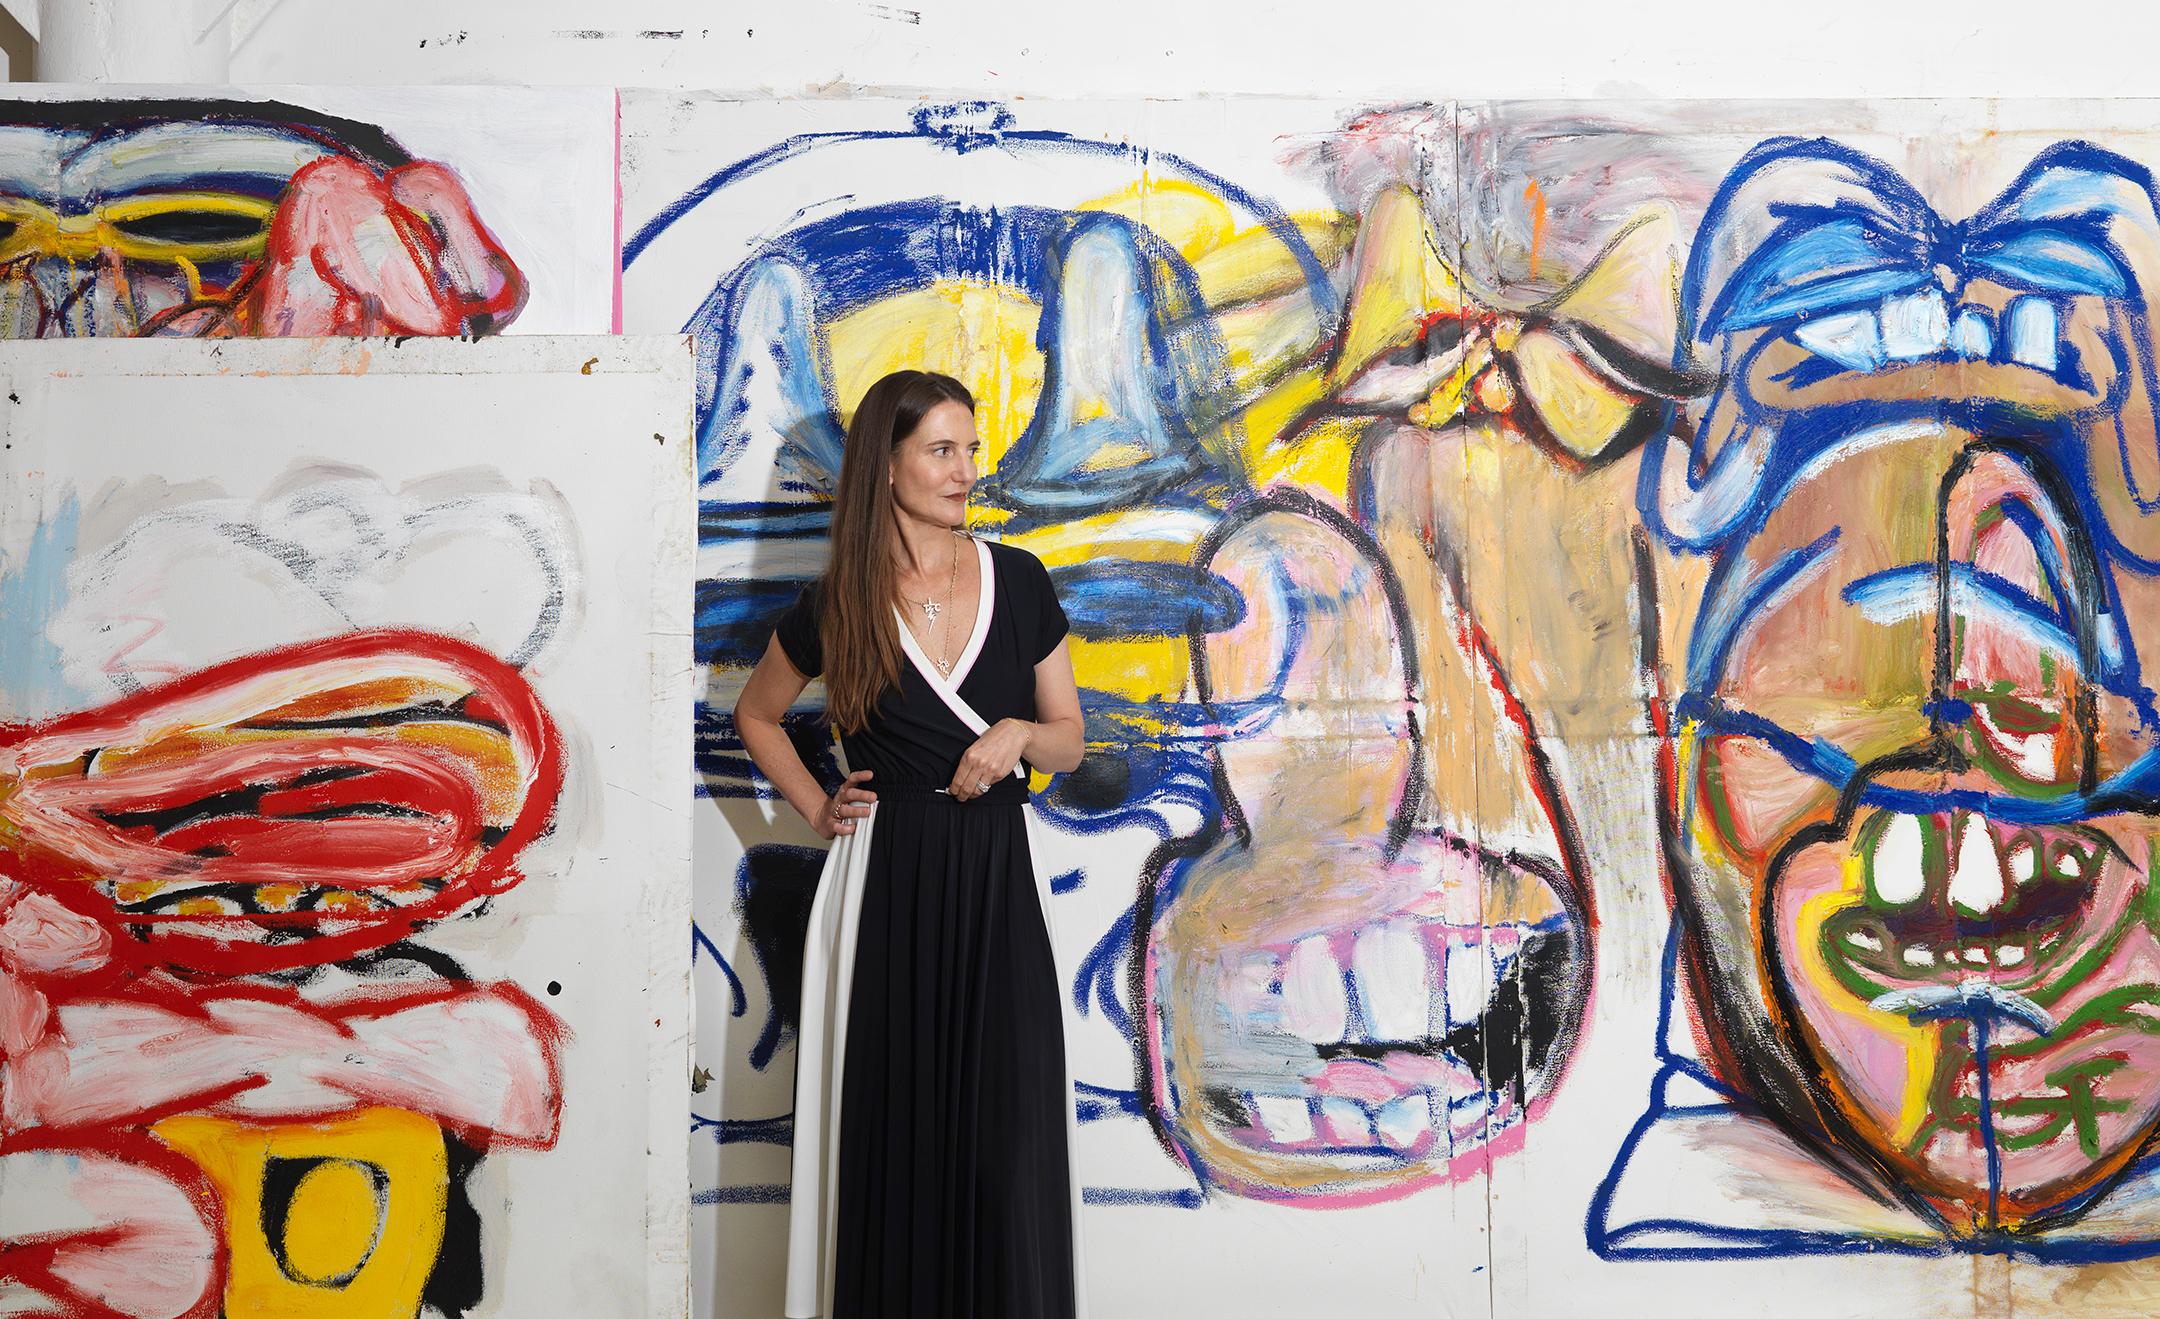 Pilar Corrias at the New York studio of Gerasimos Floratos, one of the artists she represents. Portrait by Sarah Muehlbauer. 